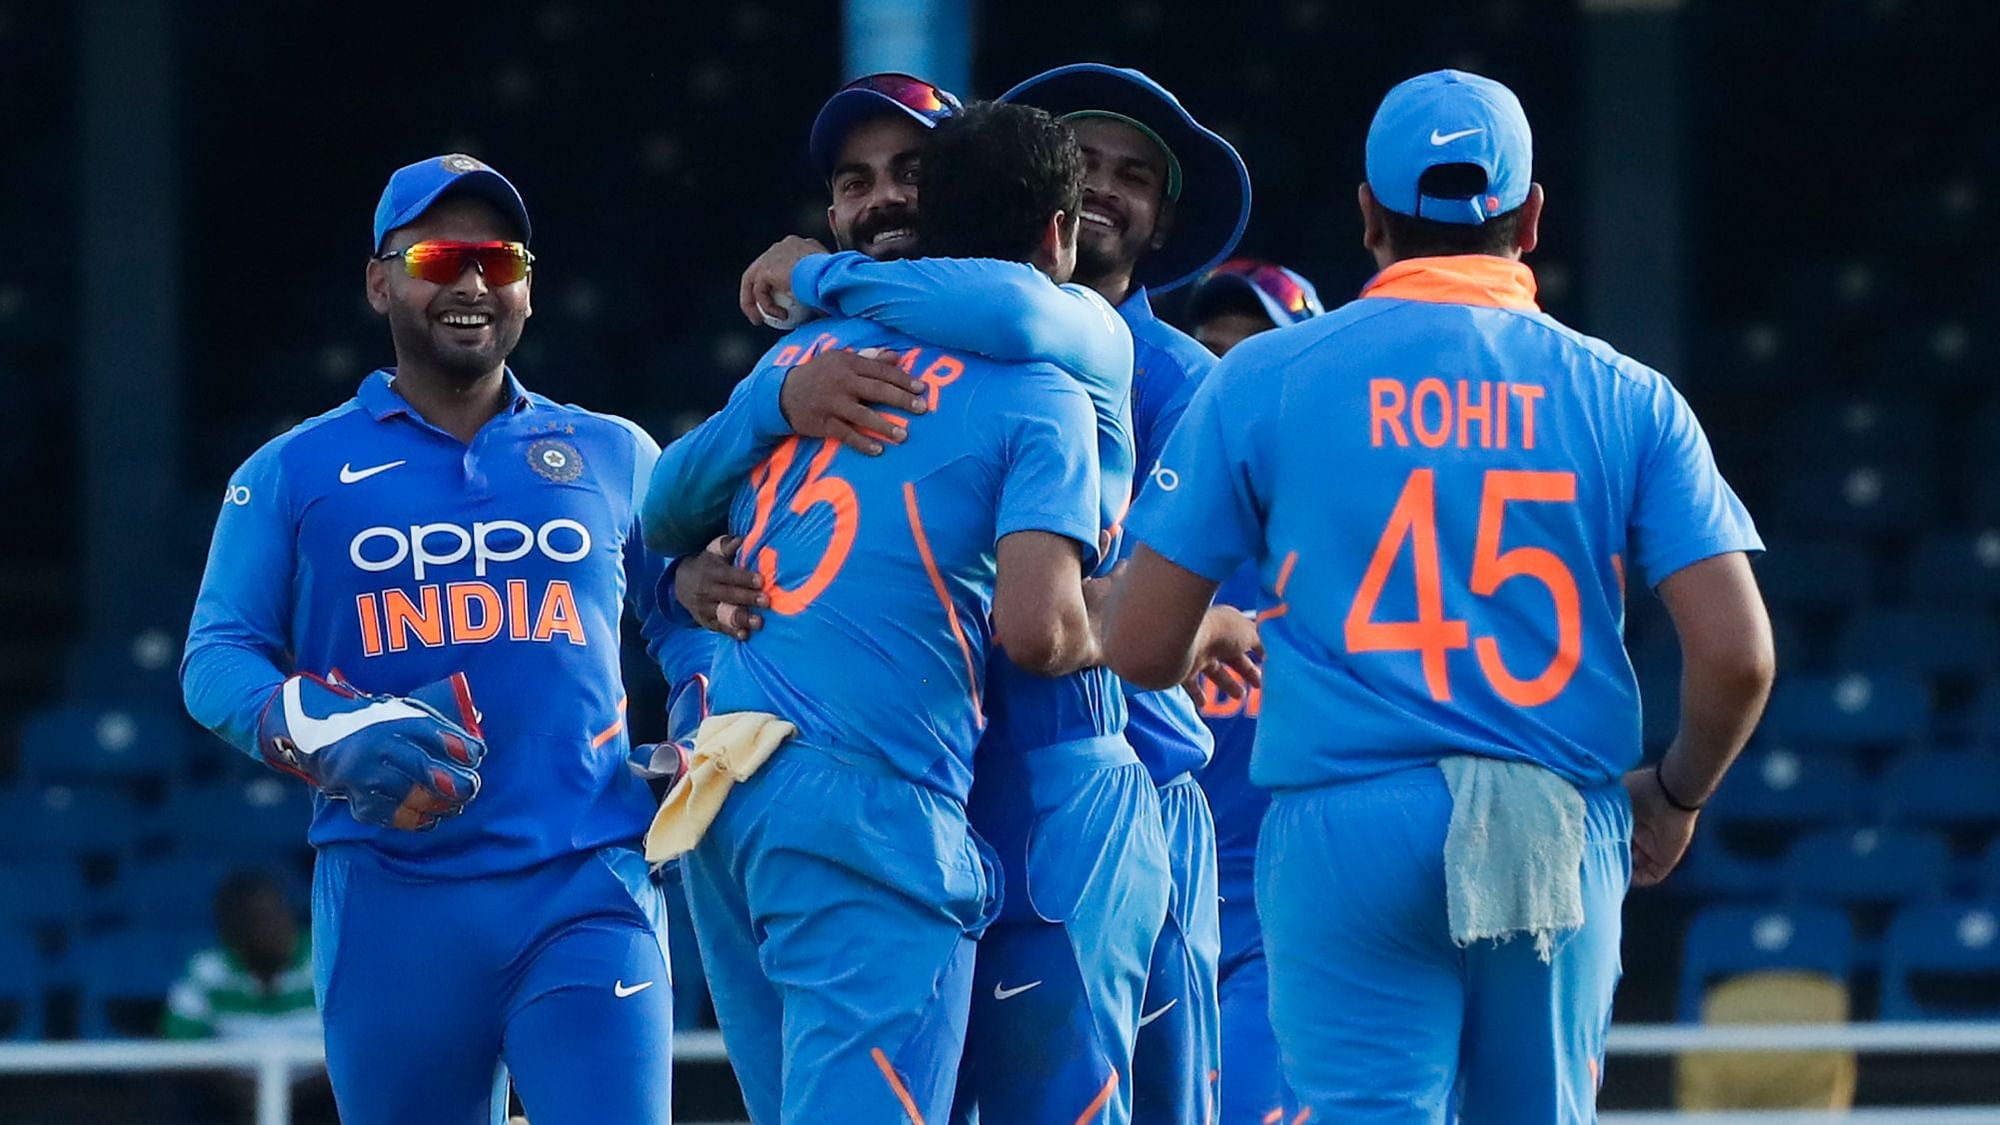 India vs West Indies 3rd ODI Live Score Streaming Online: All you need to know about the Ind vs WI 3rd ODI today. 